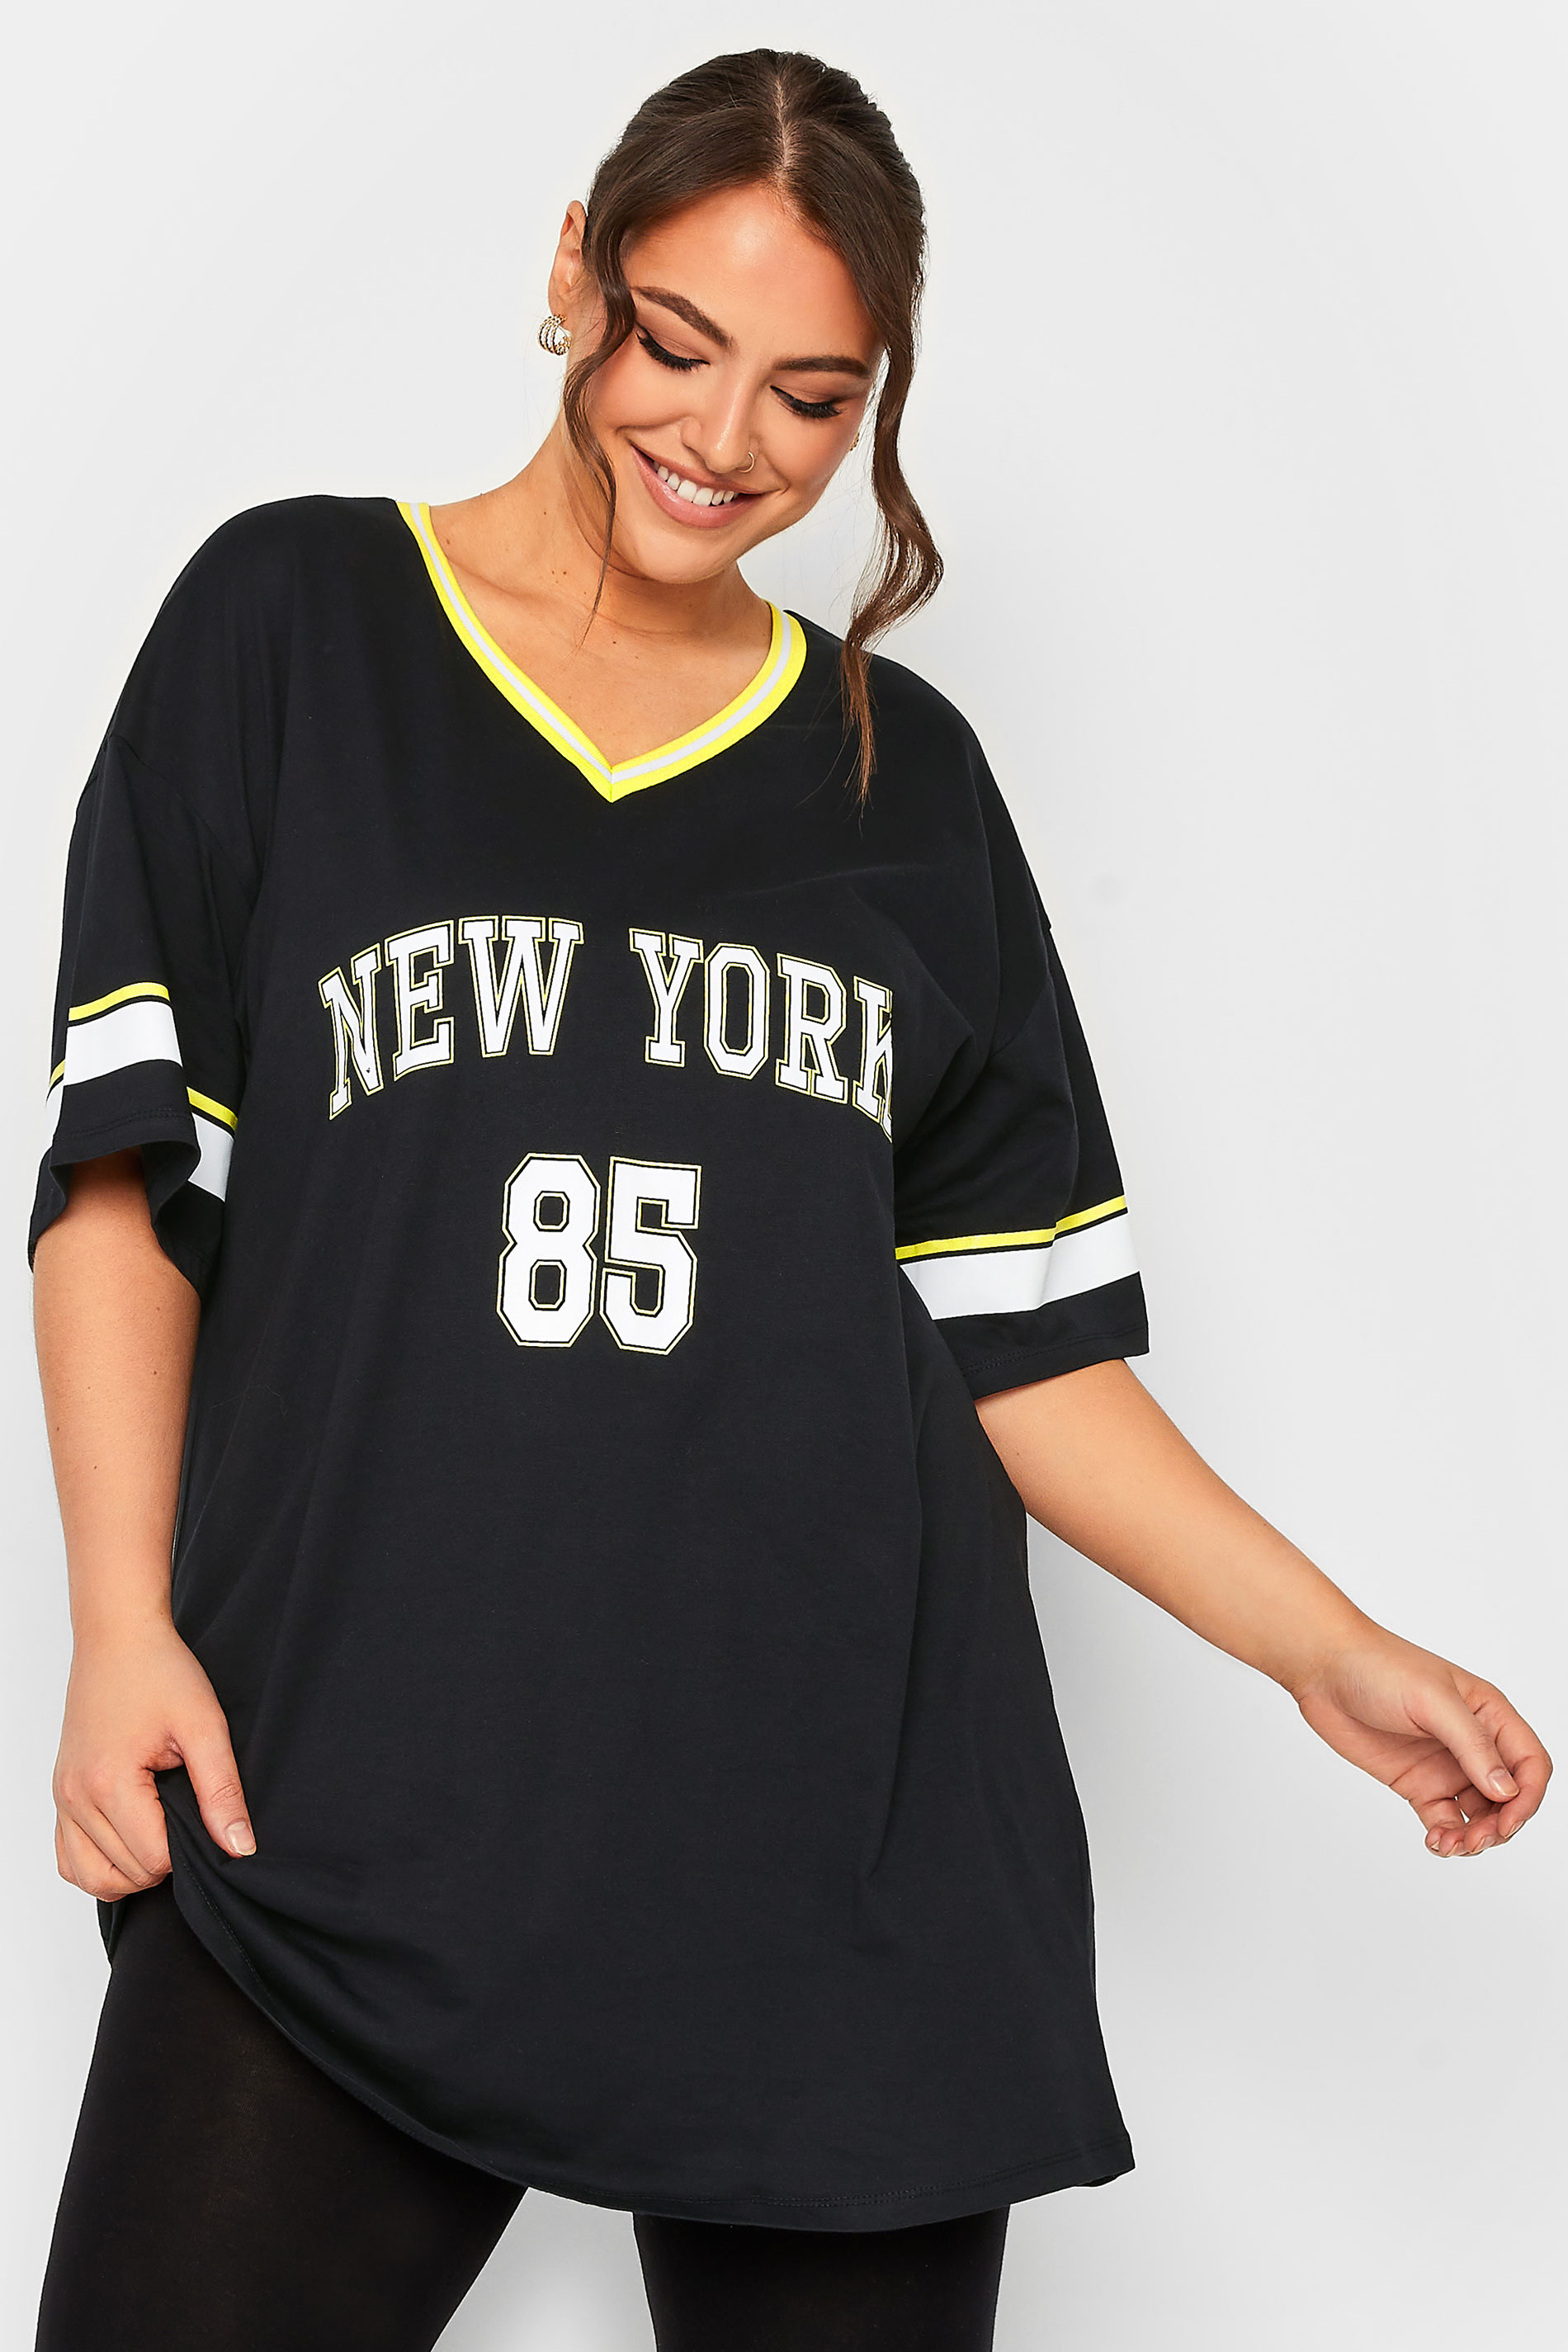 YOURS Curve Black and Yellow 'New York' Slogan Varsity Tunic Top